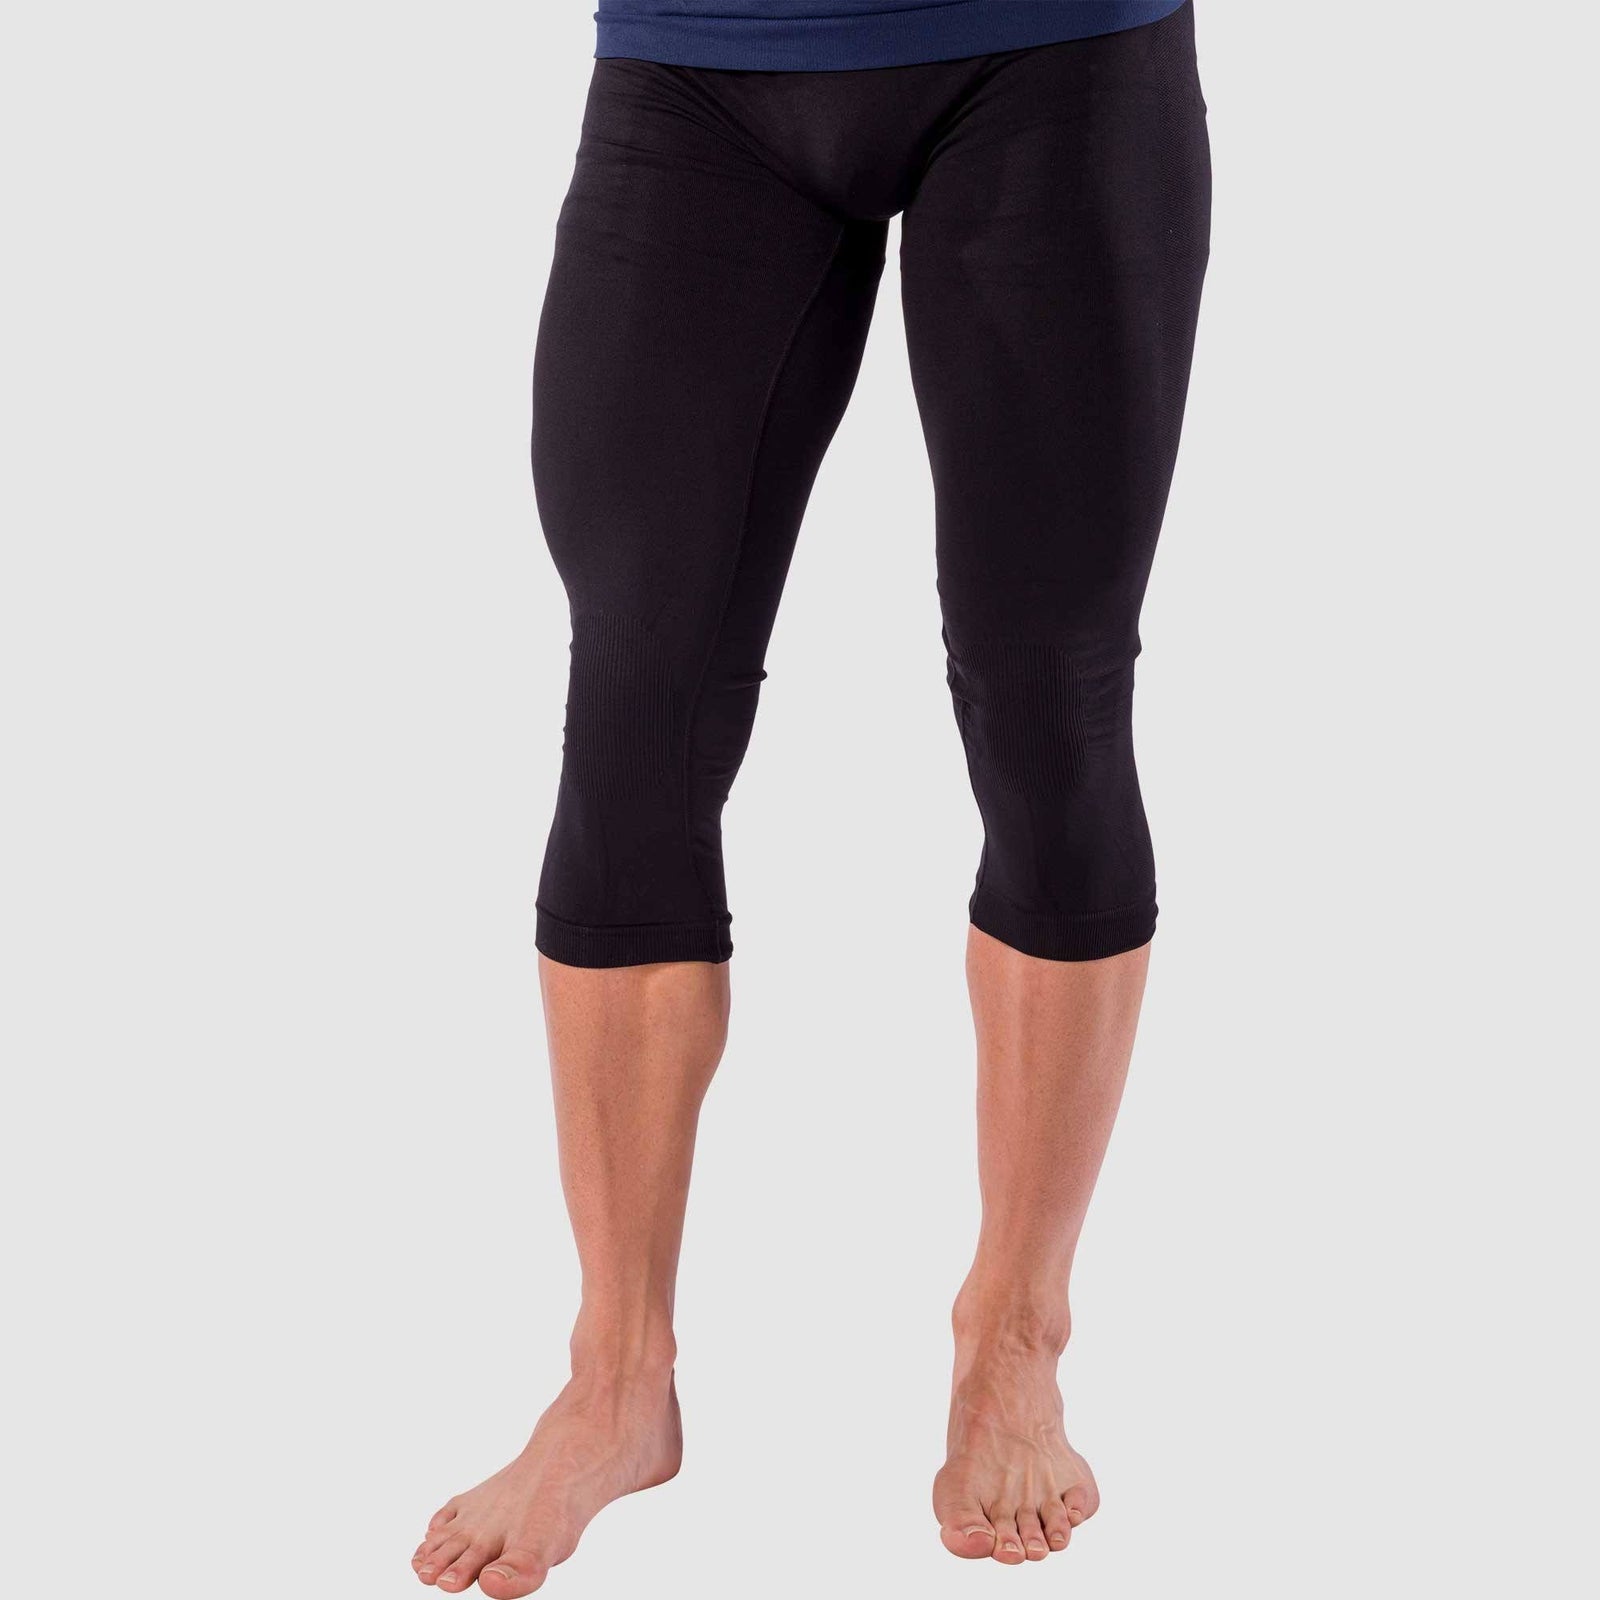 Infini Compression Race Base Layer Tights in Women average savings of 68%  at Sierra